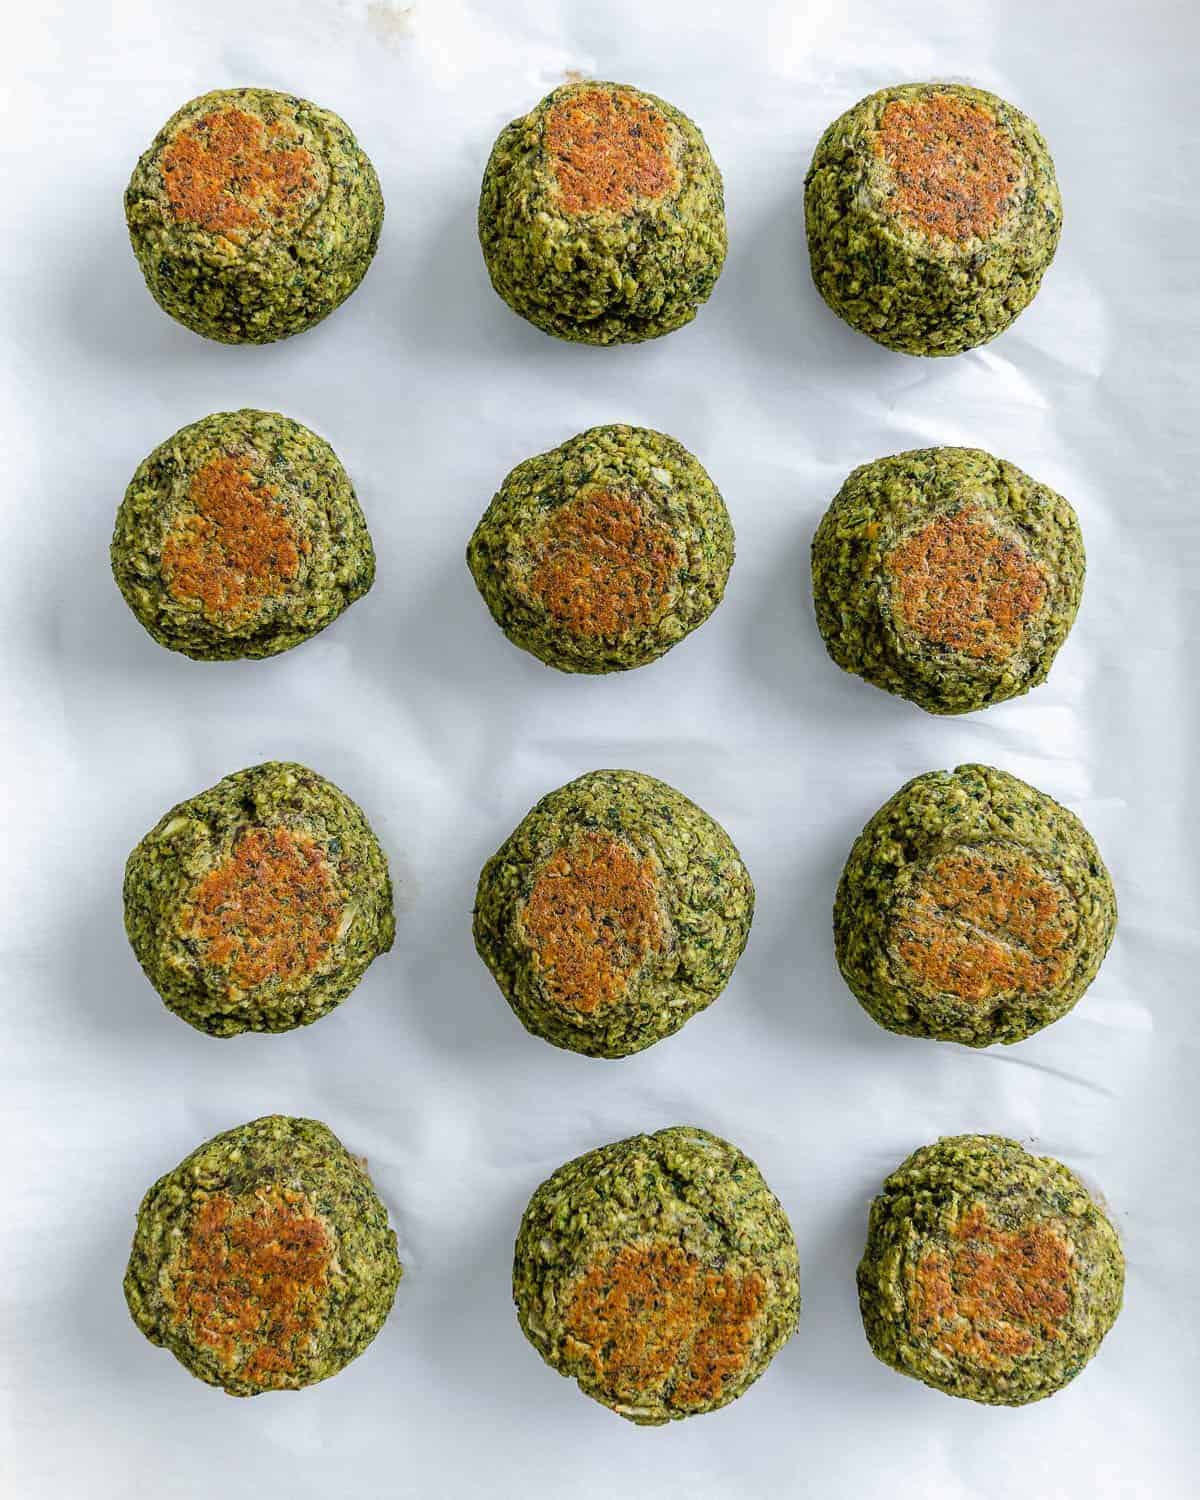 completed red lentil meatballs lined up and evenly spaced on a white surface